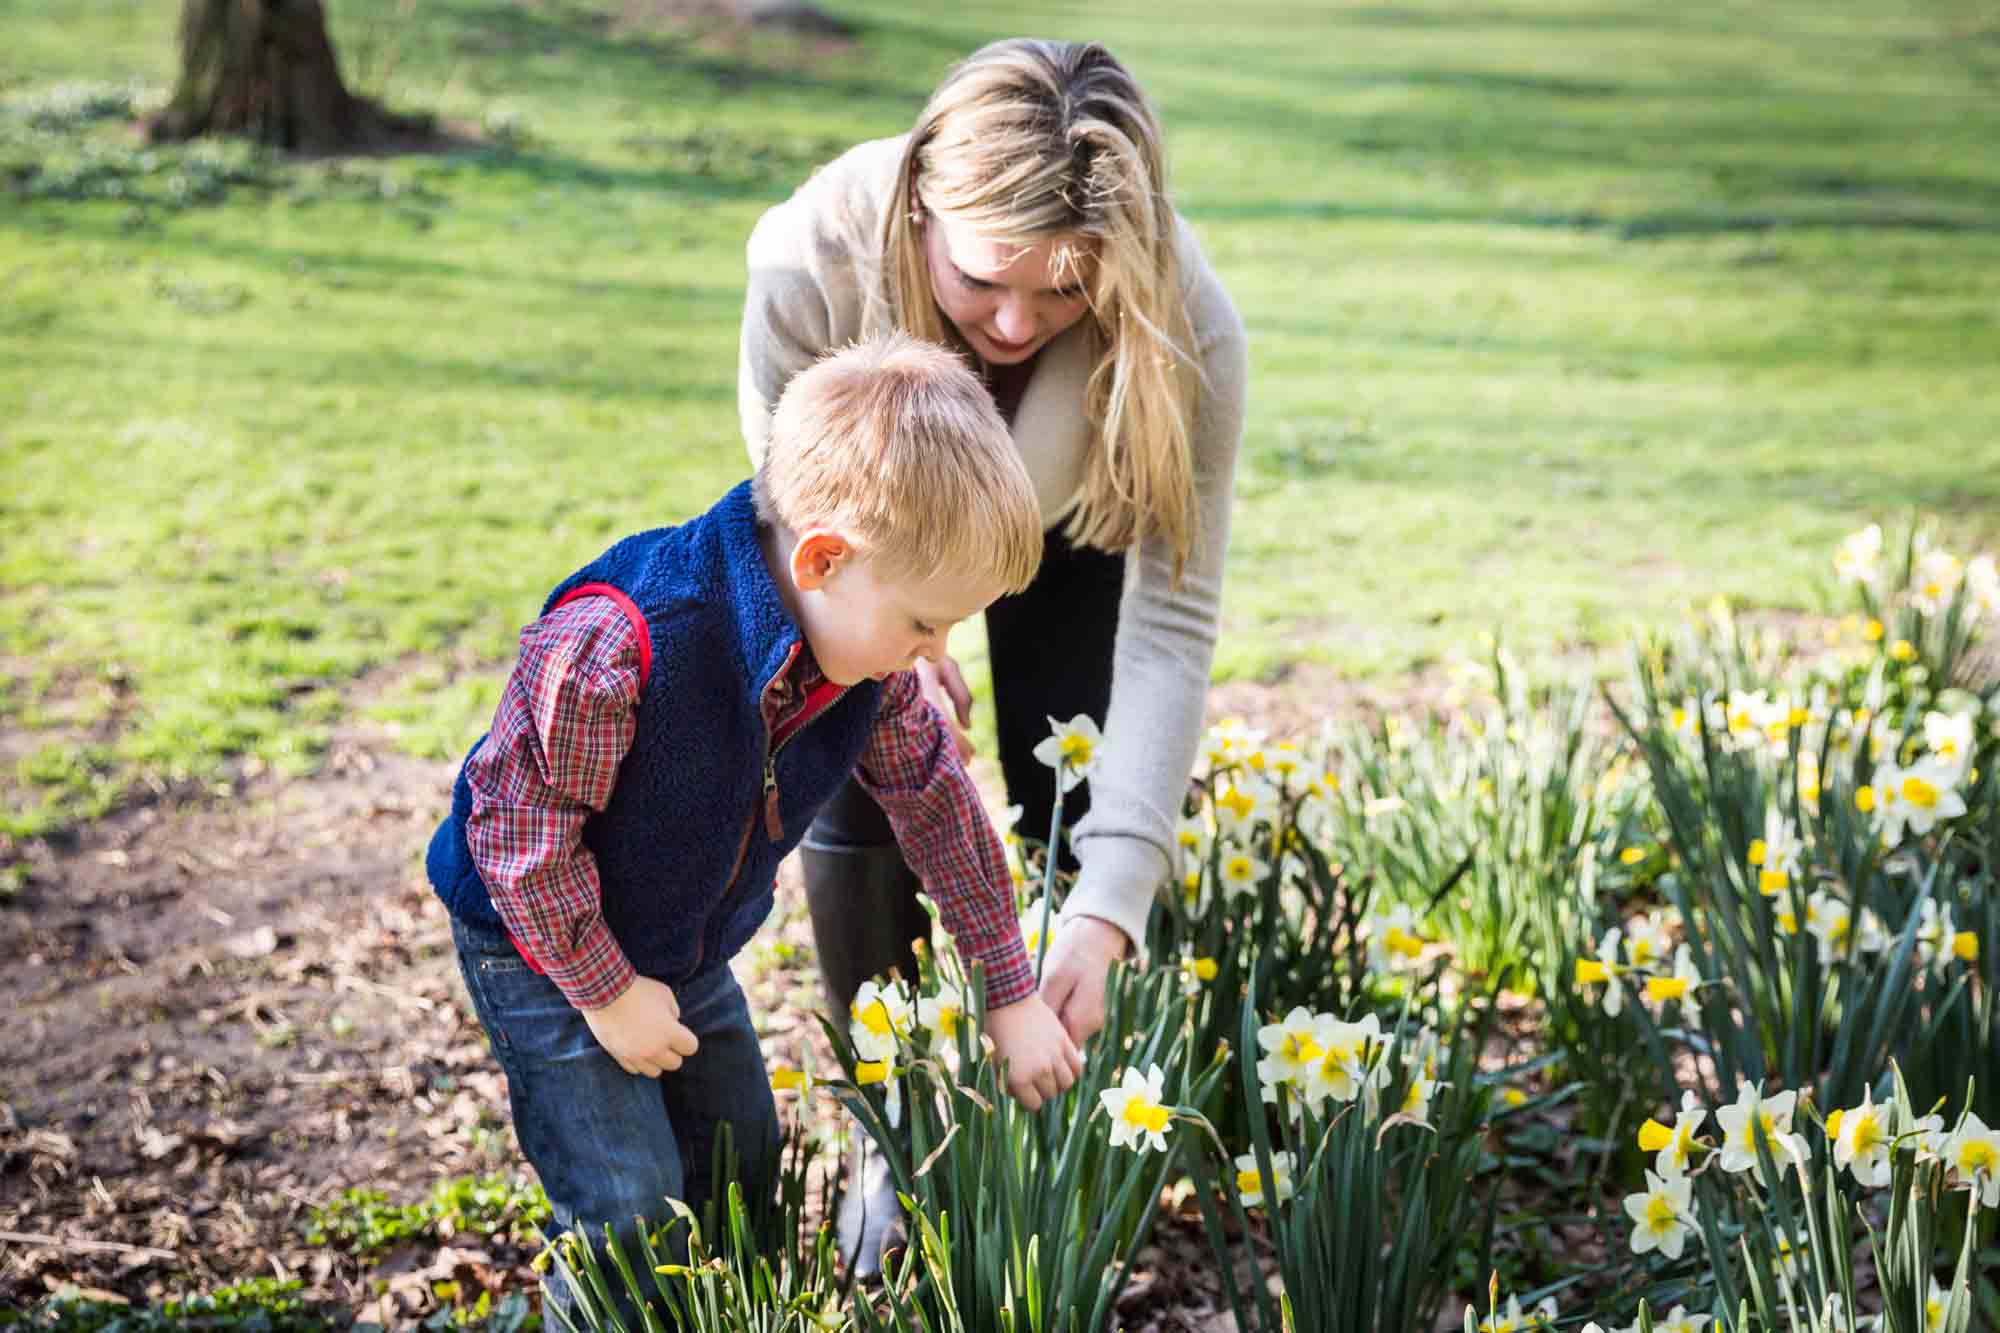 Mother and child picking daffodils for an article on the best family portrait poses